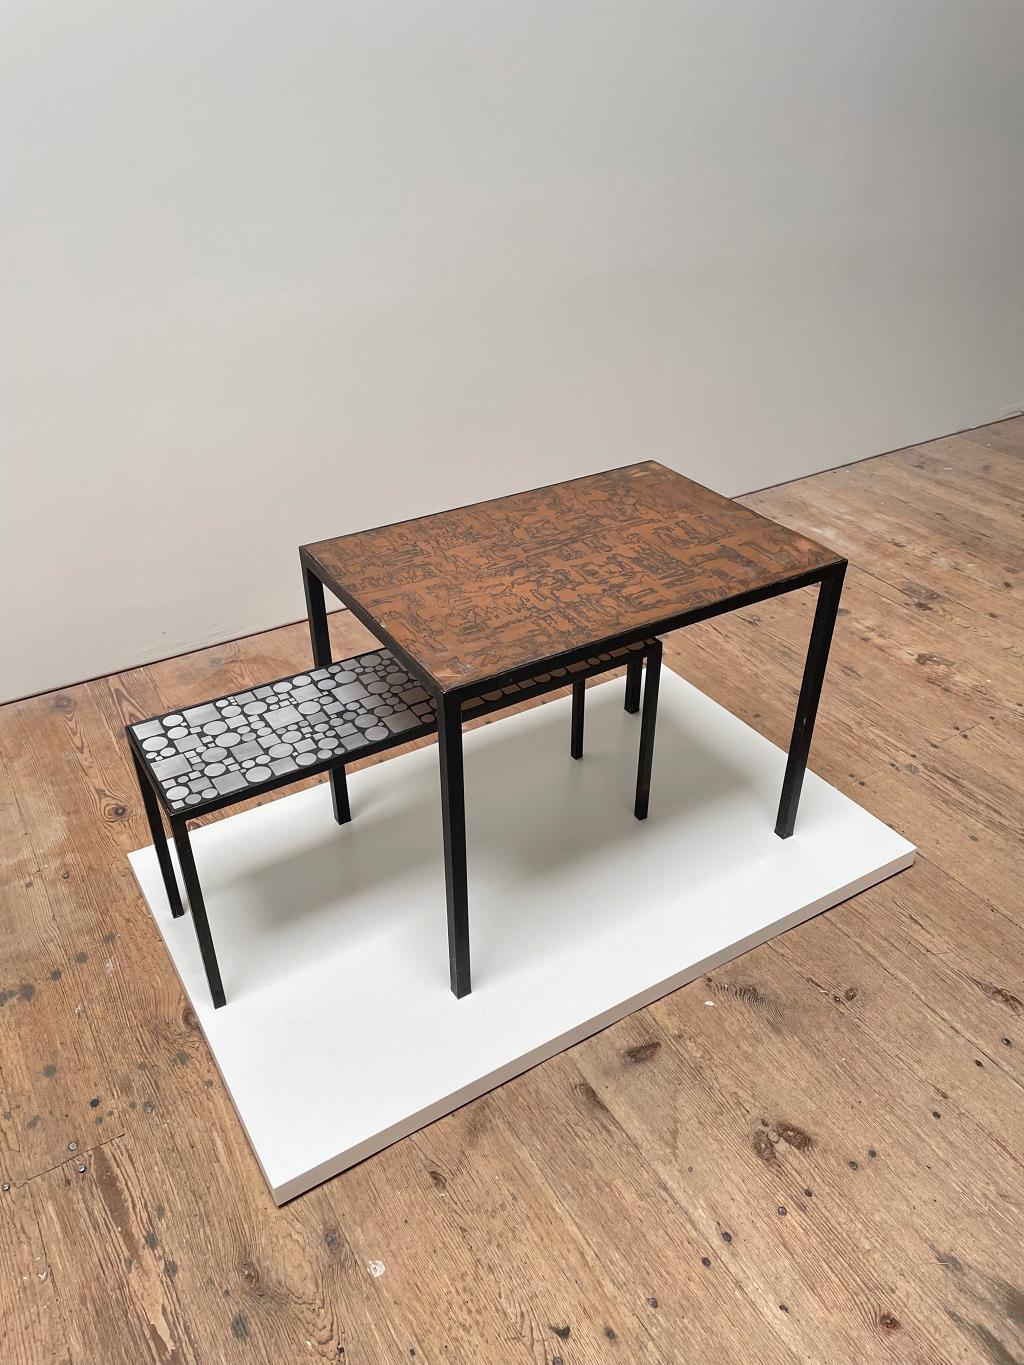 Beautiful and rare Herbert Hirche coffee or side tables, manufactured by ROSENTHAL in the 1970s. The frames are made of black lacquered steel with Cooper & Aluminium top.

Herbert Hirche was a Bauhaus student from 1930–33, his teacher being Mies van